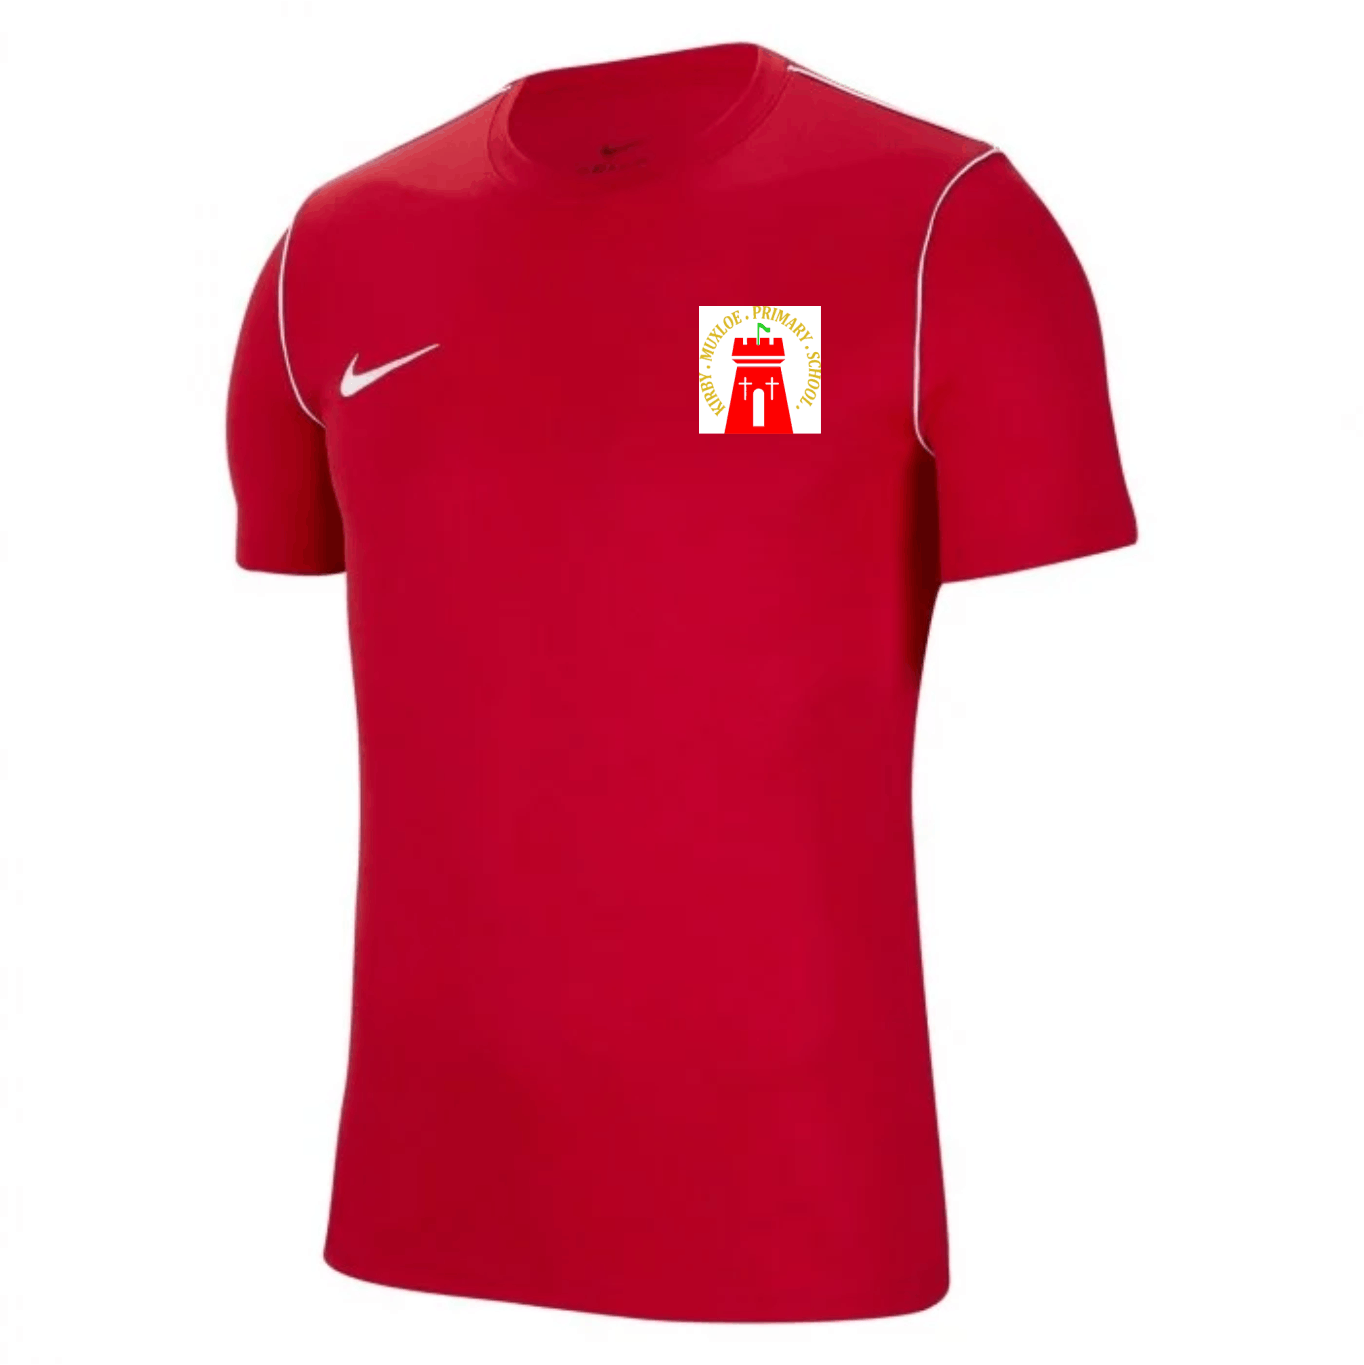 Kirby Primary School - Park 20 Training Top - Red